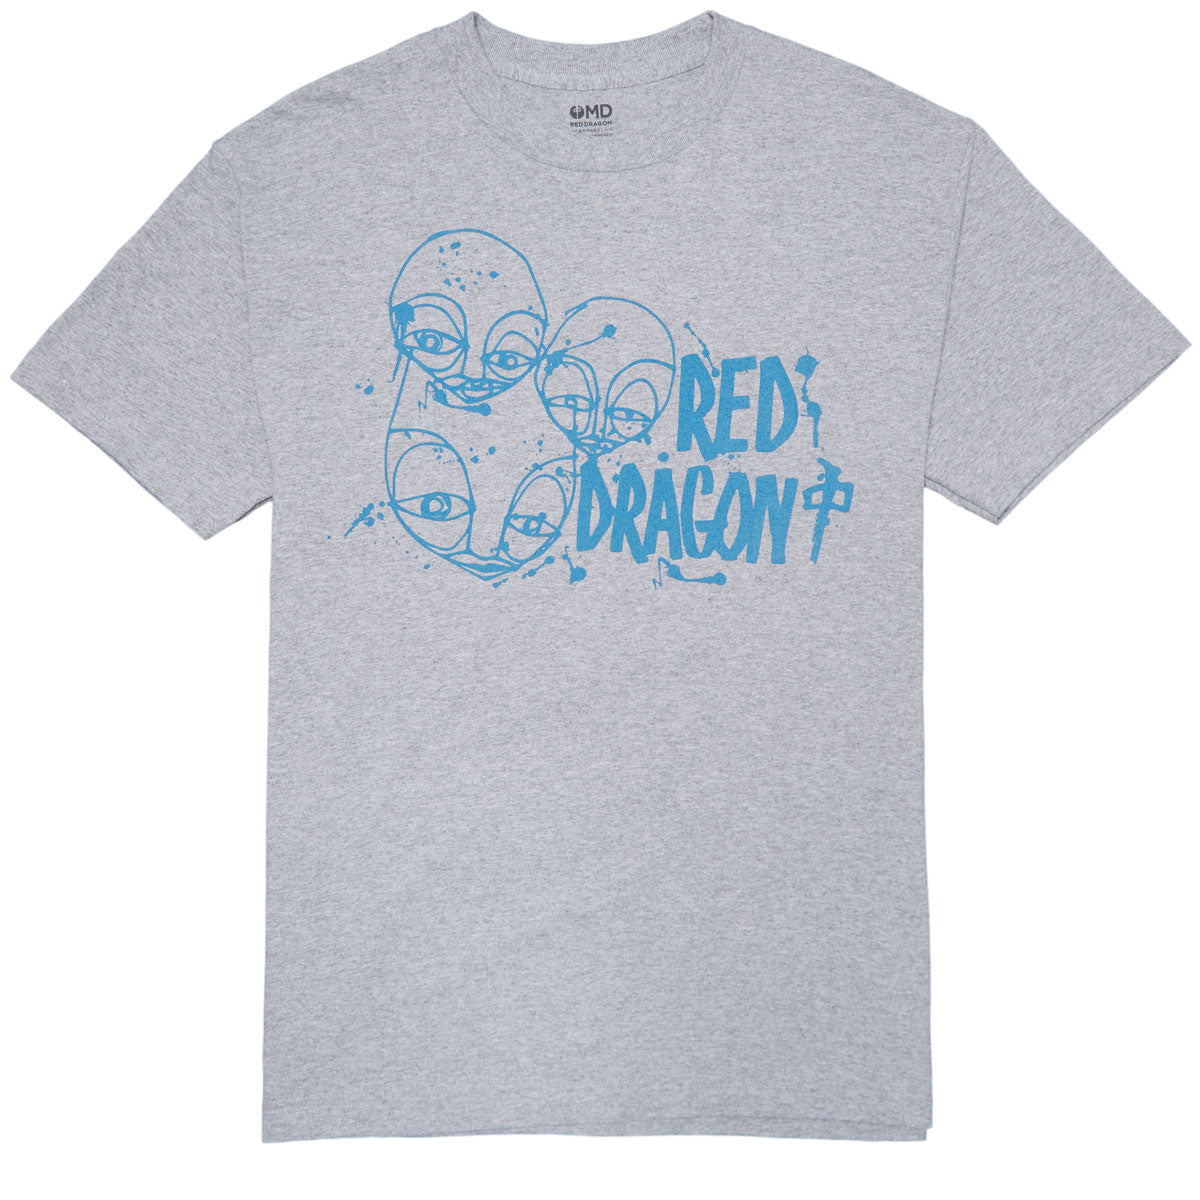 RDS x Kris Markovich Faces T-Shirt - Heather image 1